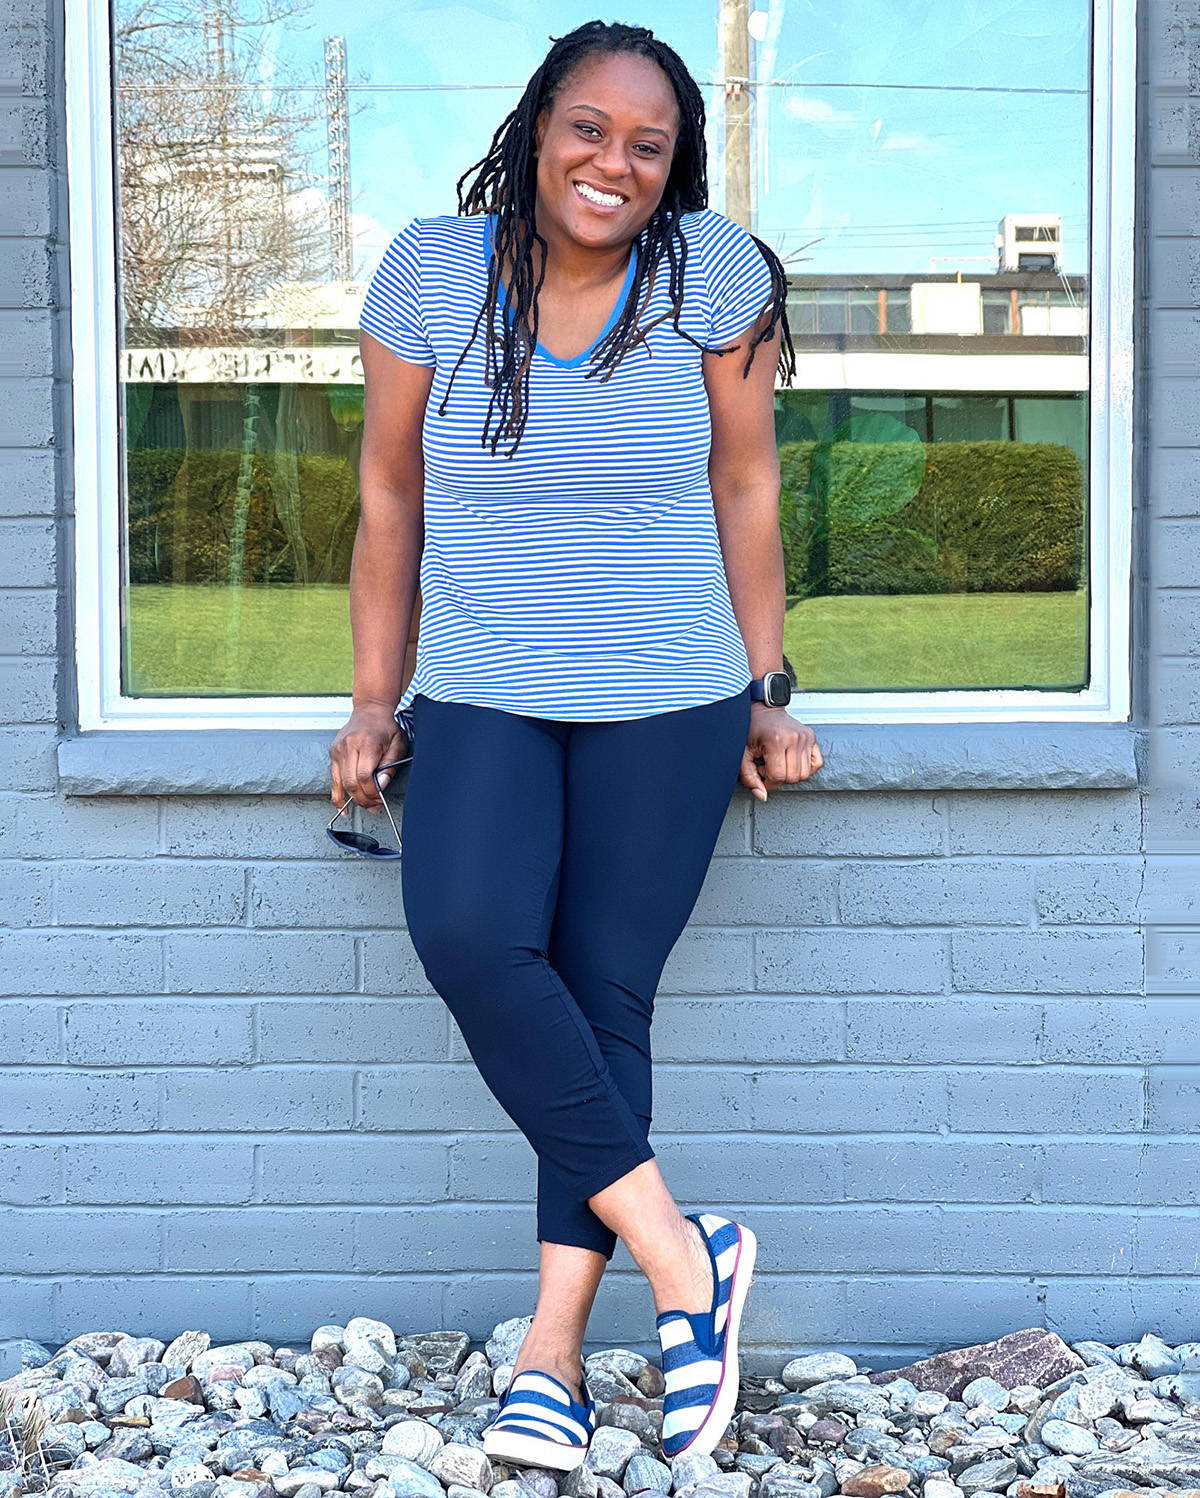 Woman leaning against a window smiling wearing Miik's Lisa2 capri legging in navy with a blue striped t-shirt.